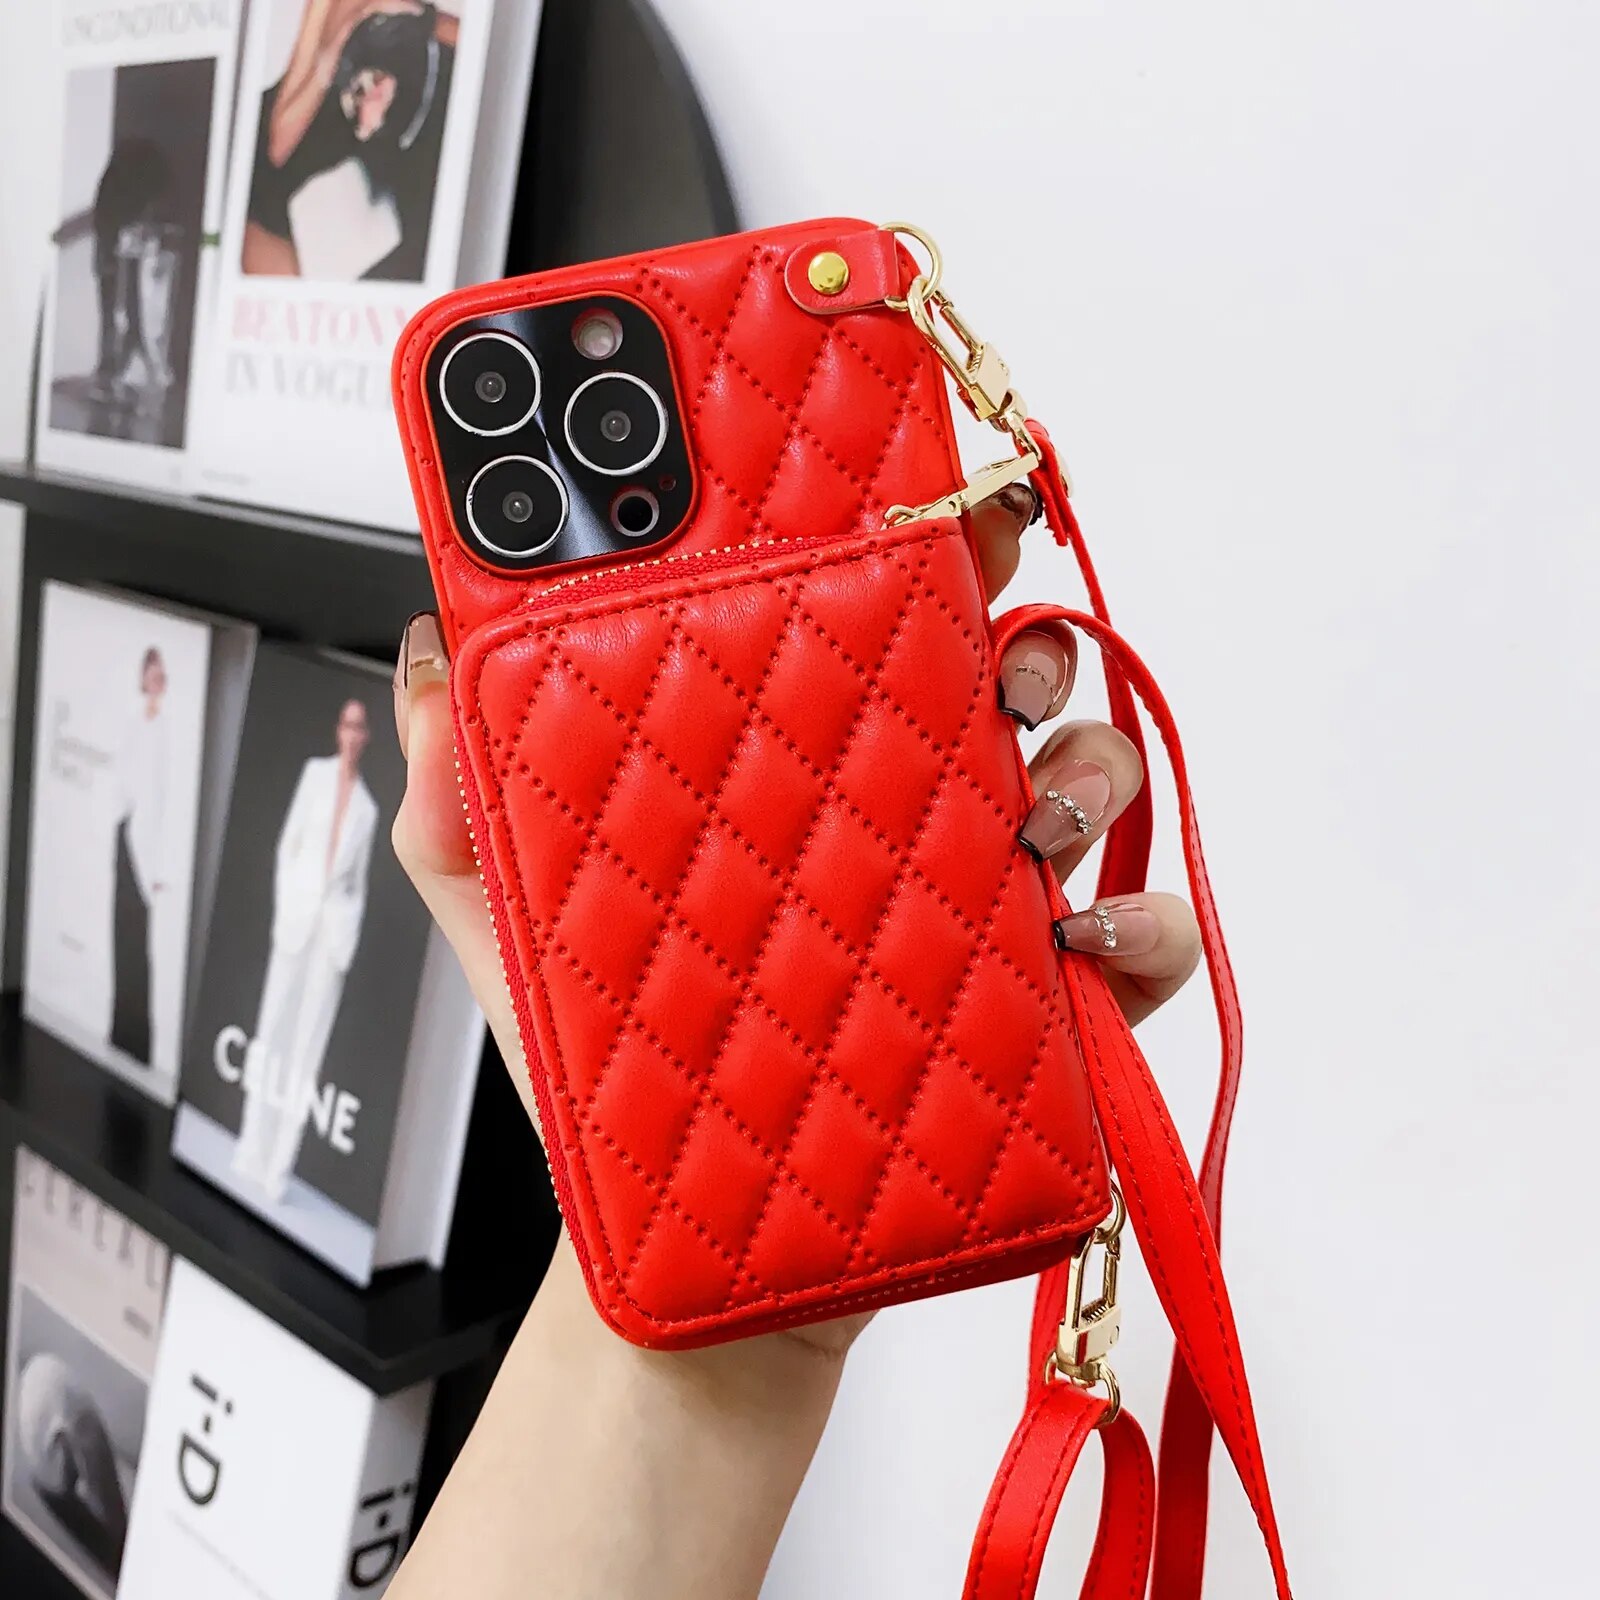 S3a5545c6247948a1a8efc99f2ad7ab09m Zipper Wallet Leather Coin Purse Case for iPhone